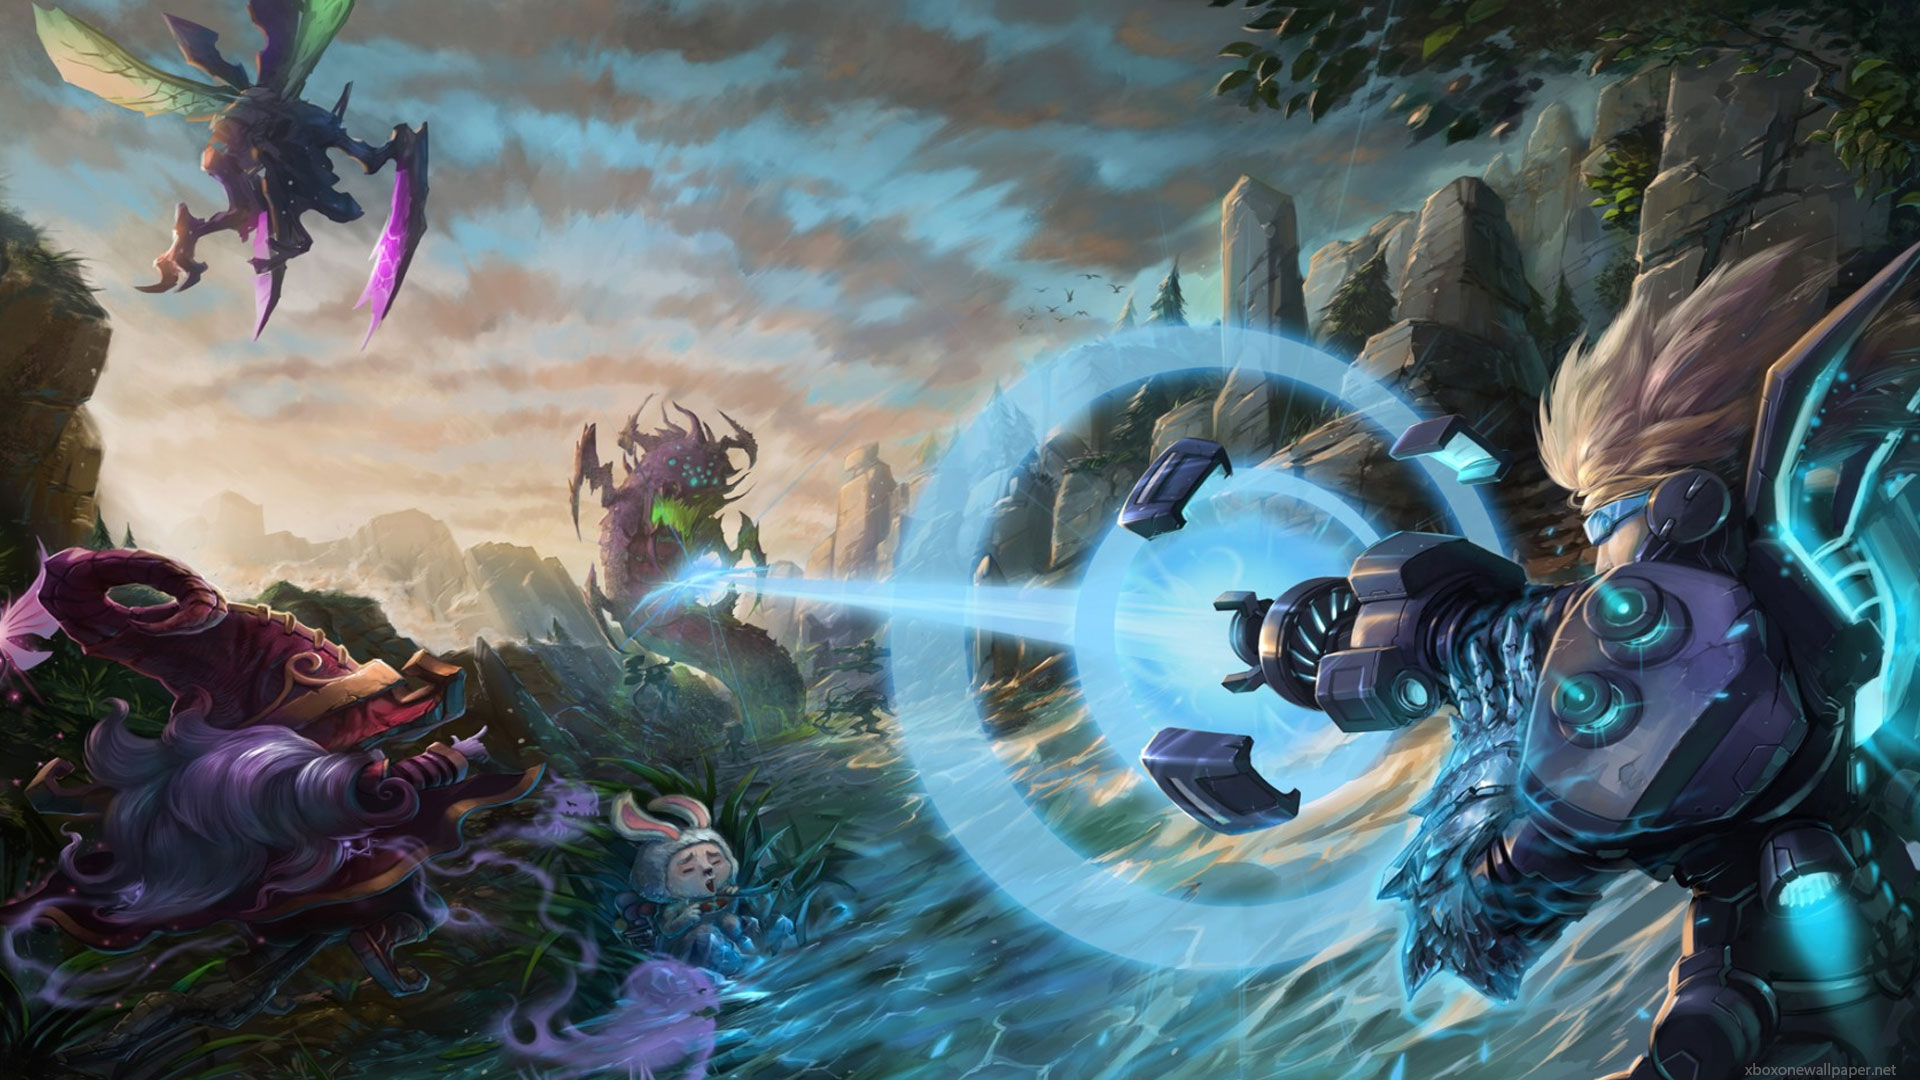 league of legends wallpaper hd 1920x1080,action adventure game,cg artwork,mythology,pc game,strategy video game